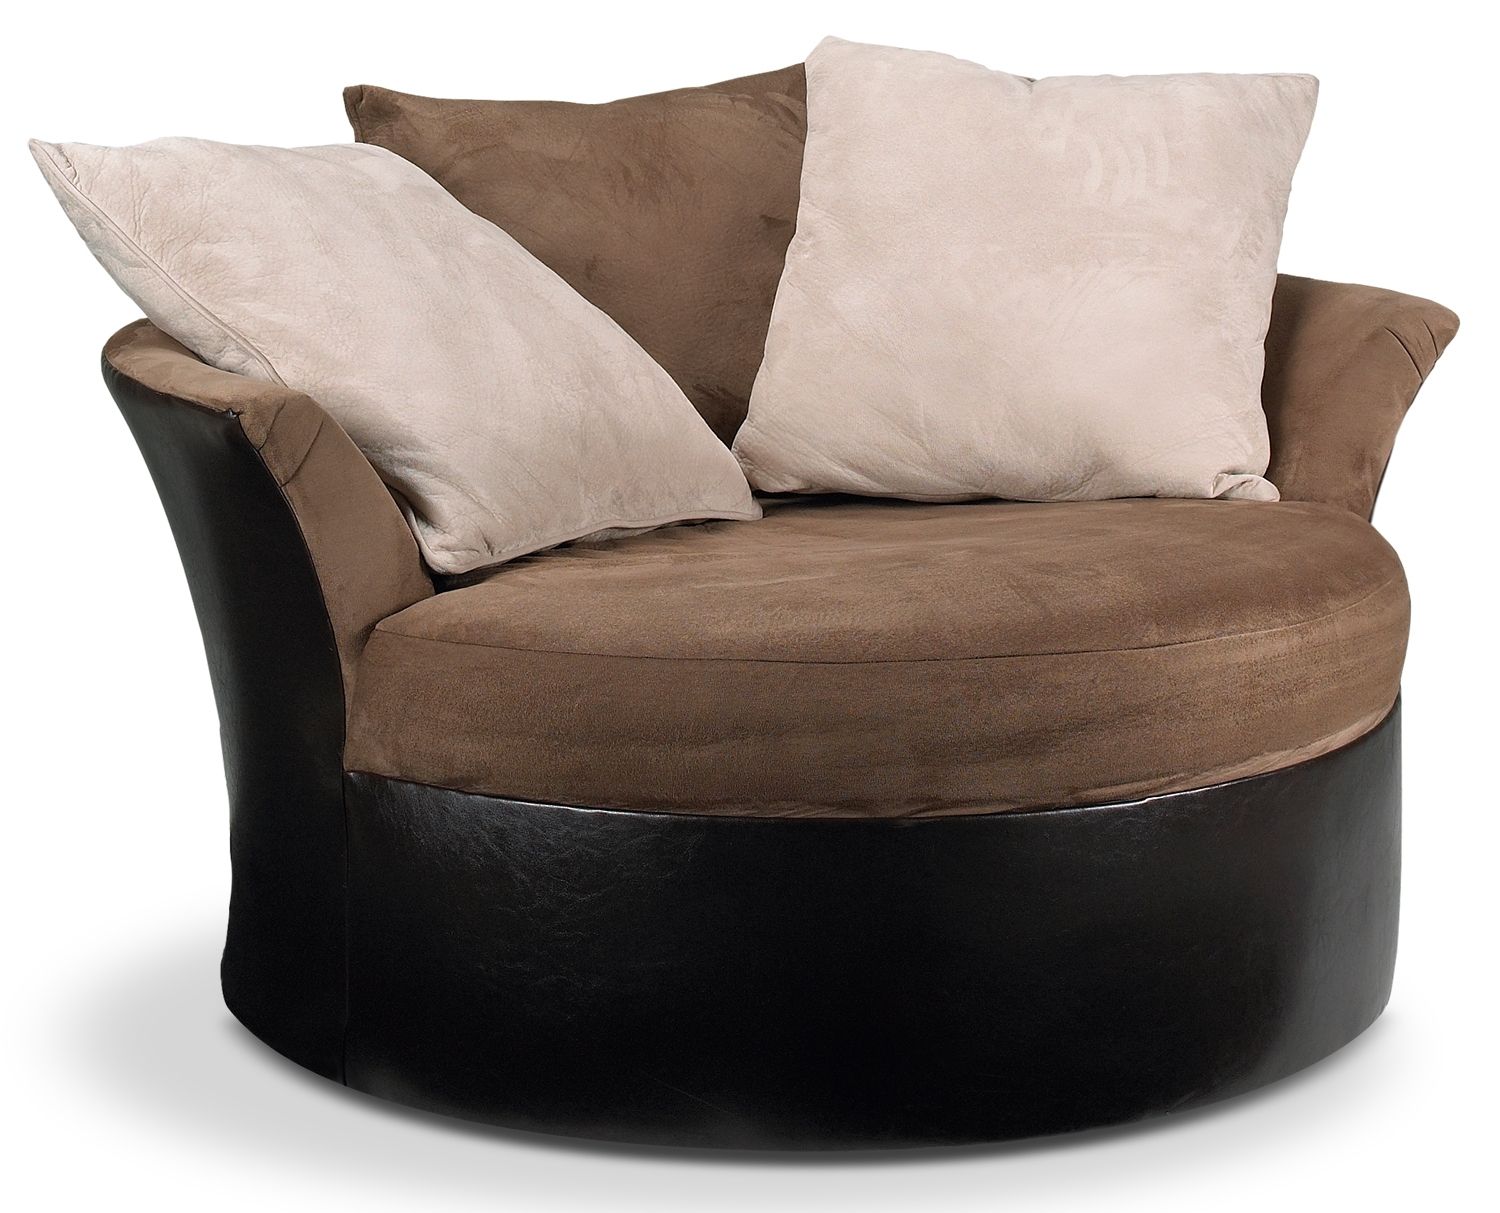 Round Sofa Chair Pertaining To Round Sofa Chair (View 8 of 15)